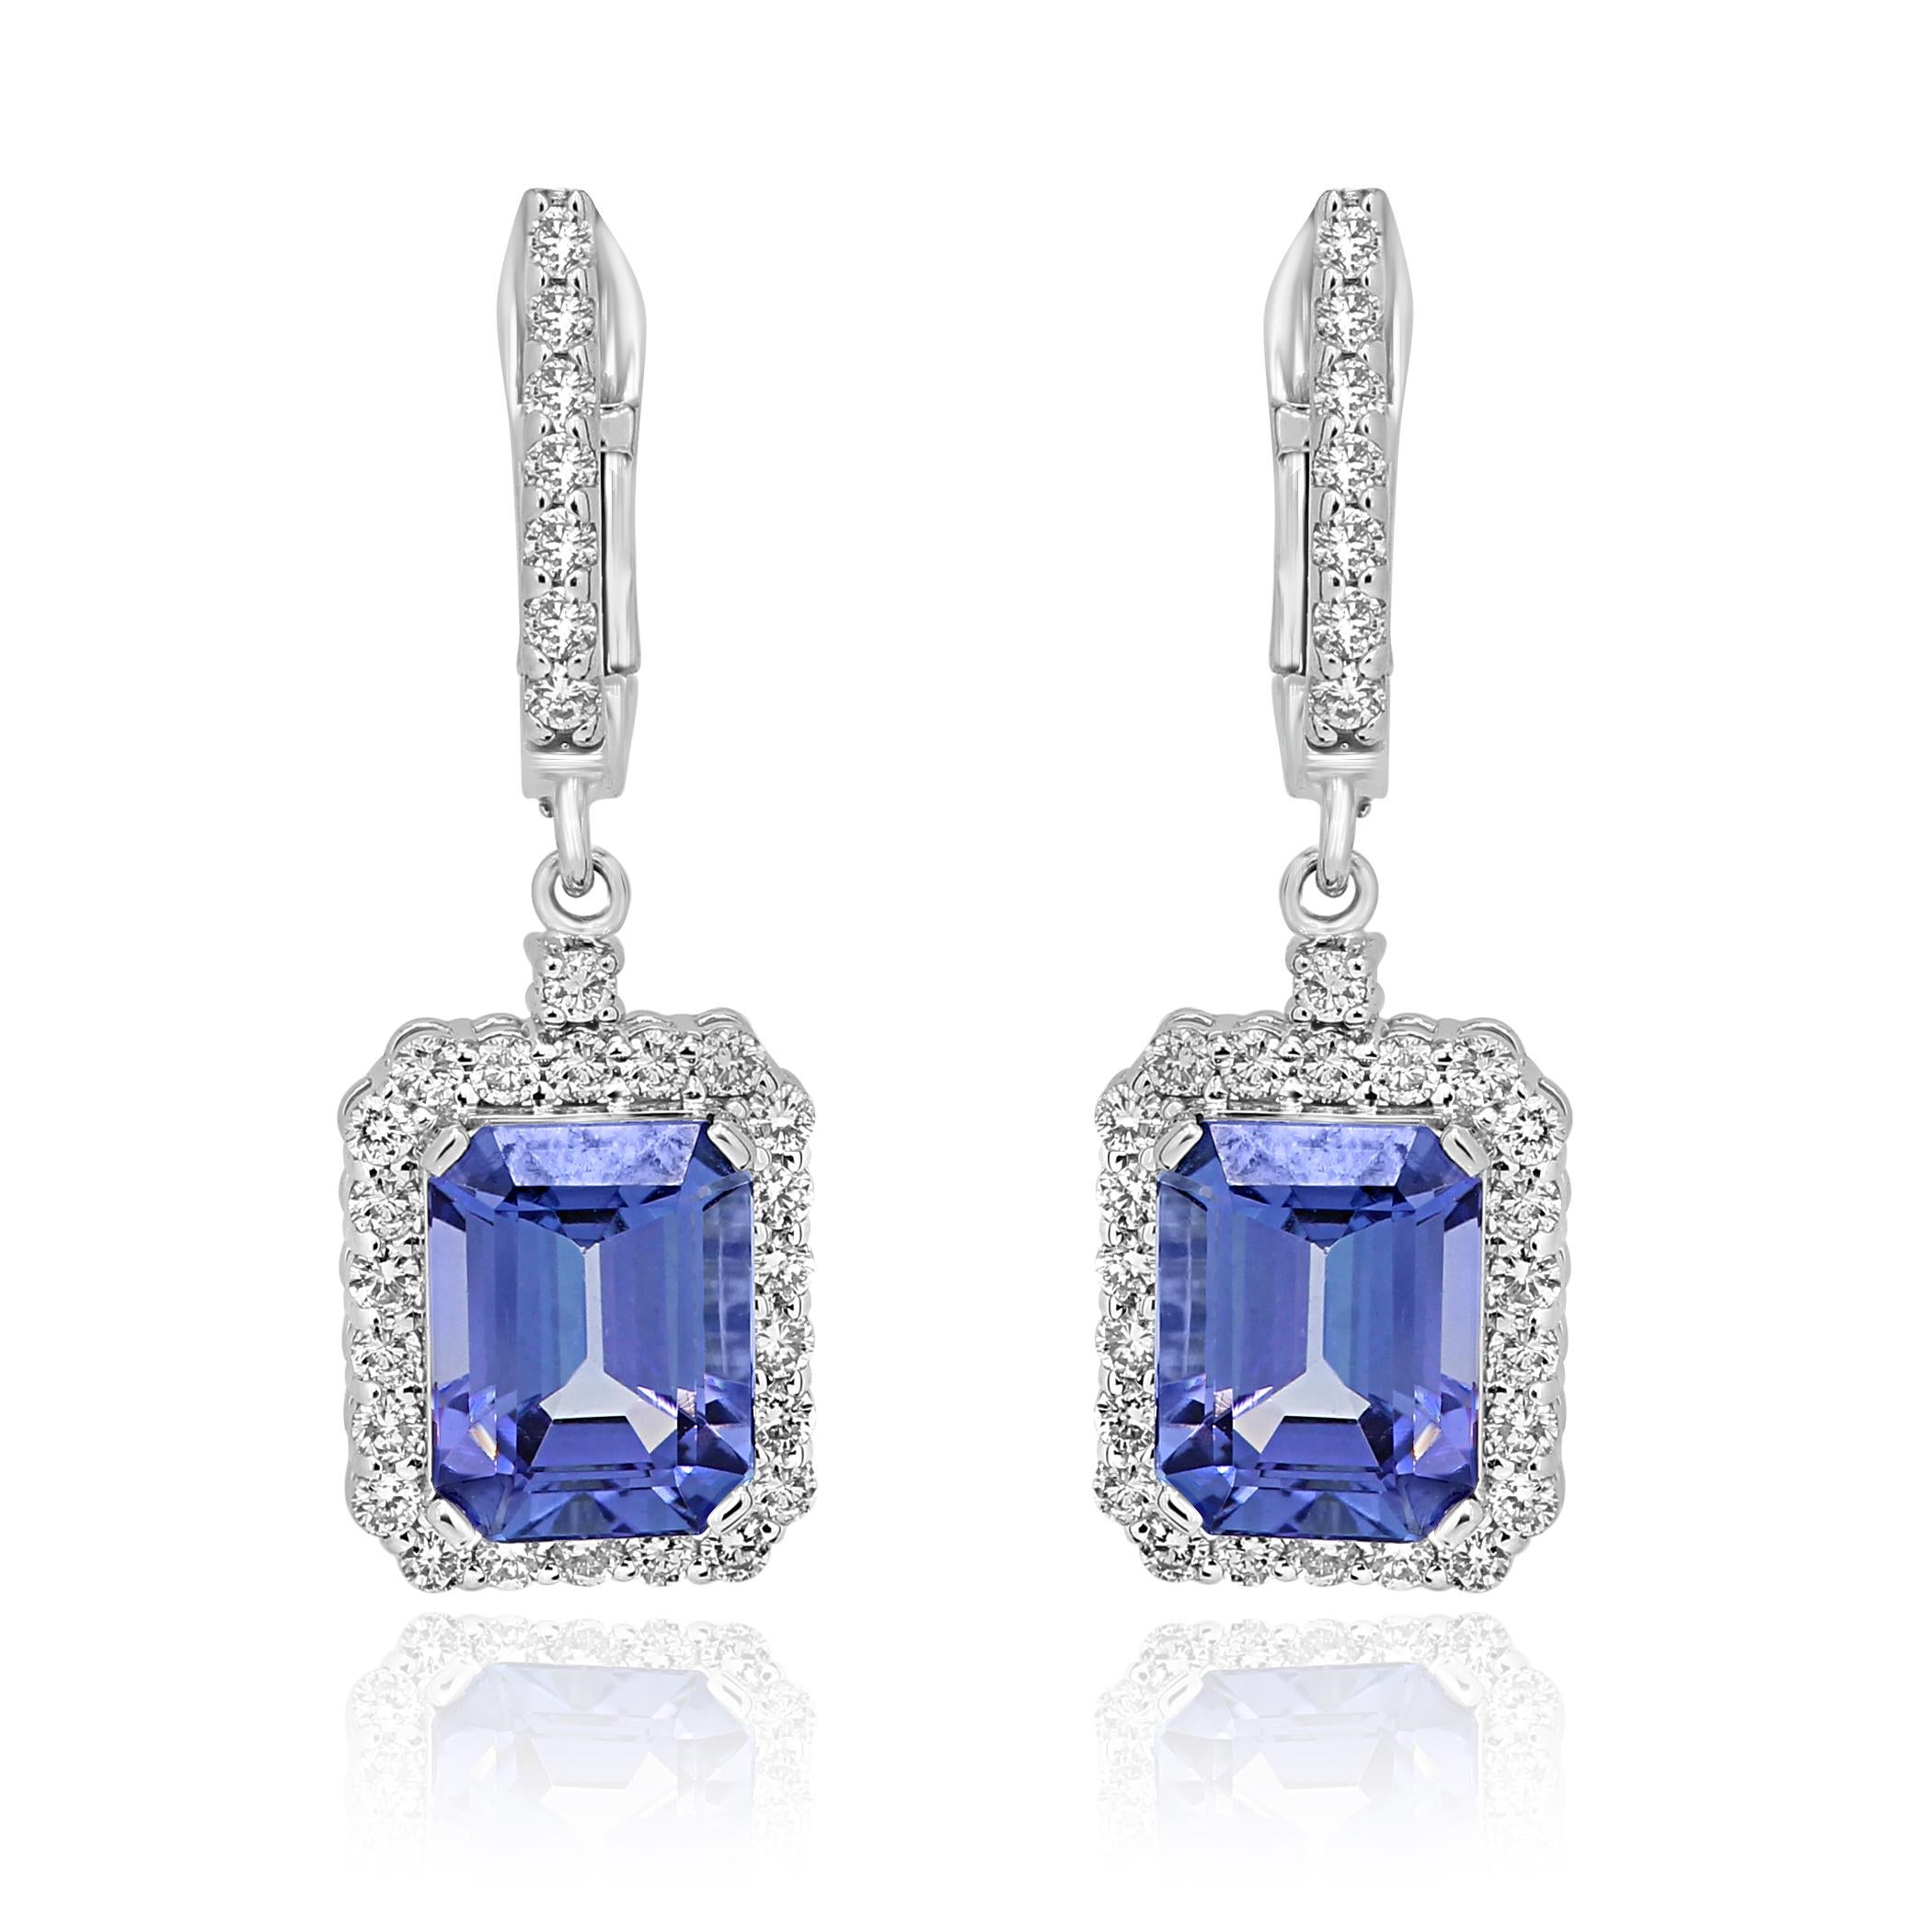 Gorgeous 2 Tanzanite Emerald cut 4.93 Carat Encircled in Halo White G-H Color VS-SI 0.82 Carat in 14K  White Gold Dangle Drop Fashion Earring. Total Weight 5.75 Carat.

Style available in different price ranges. Prices are based on your selection of